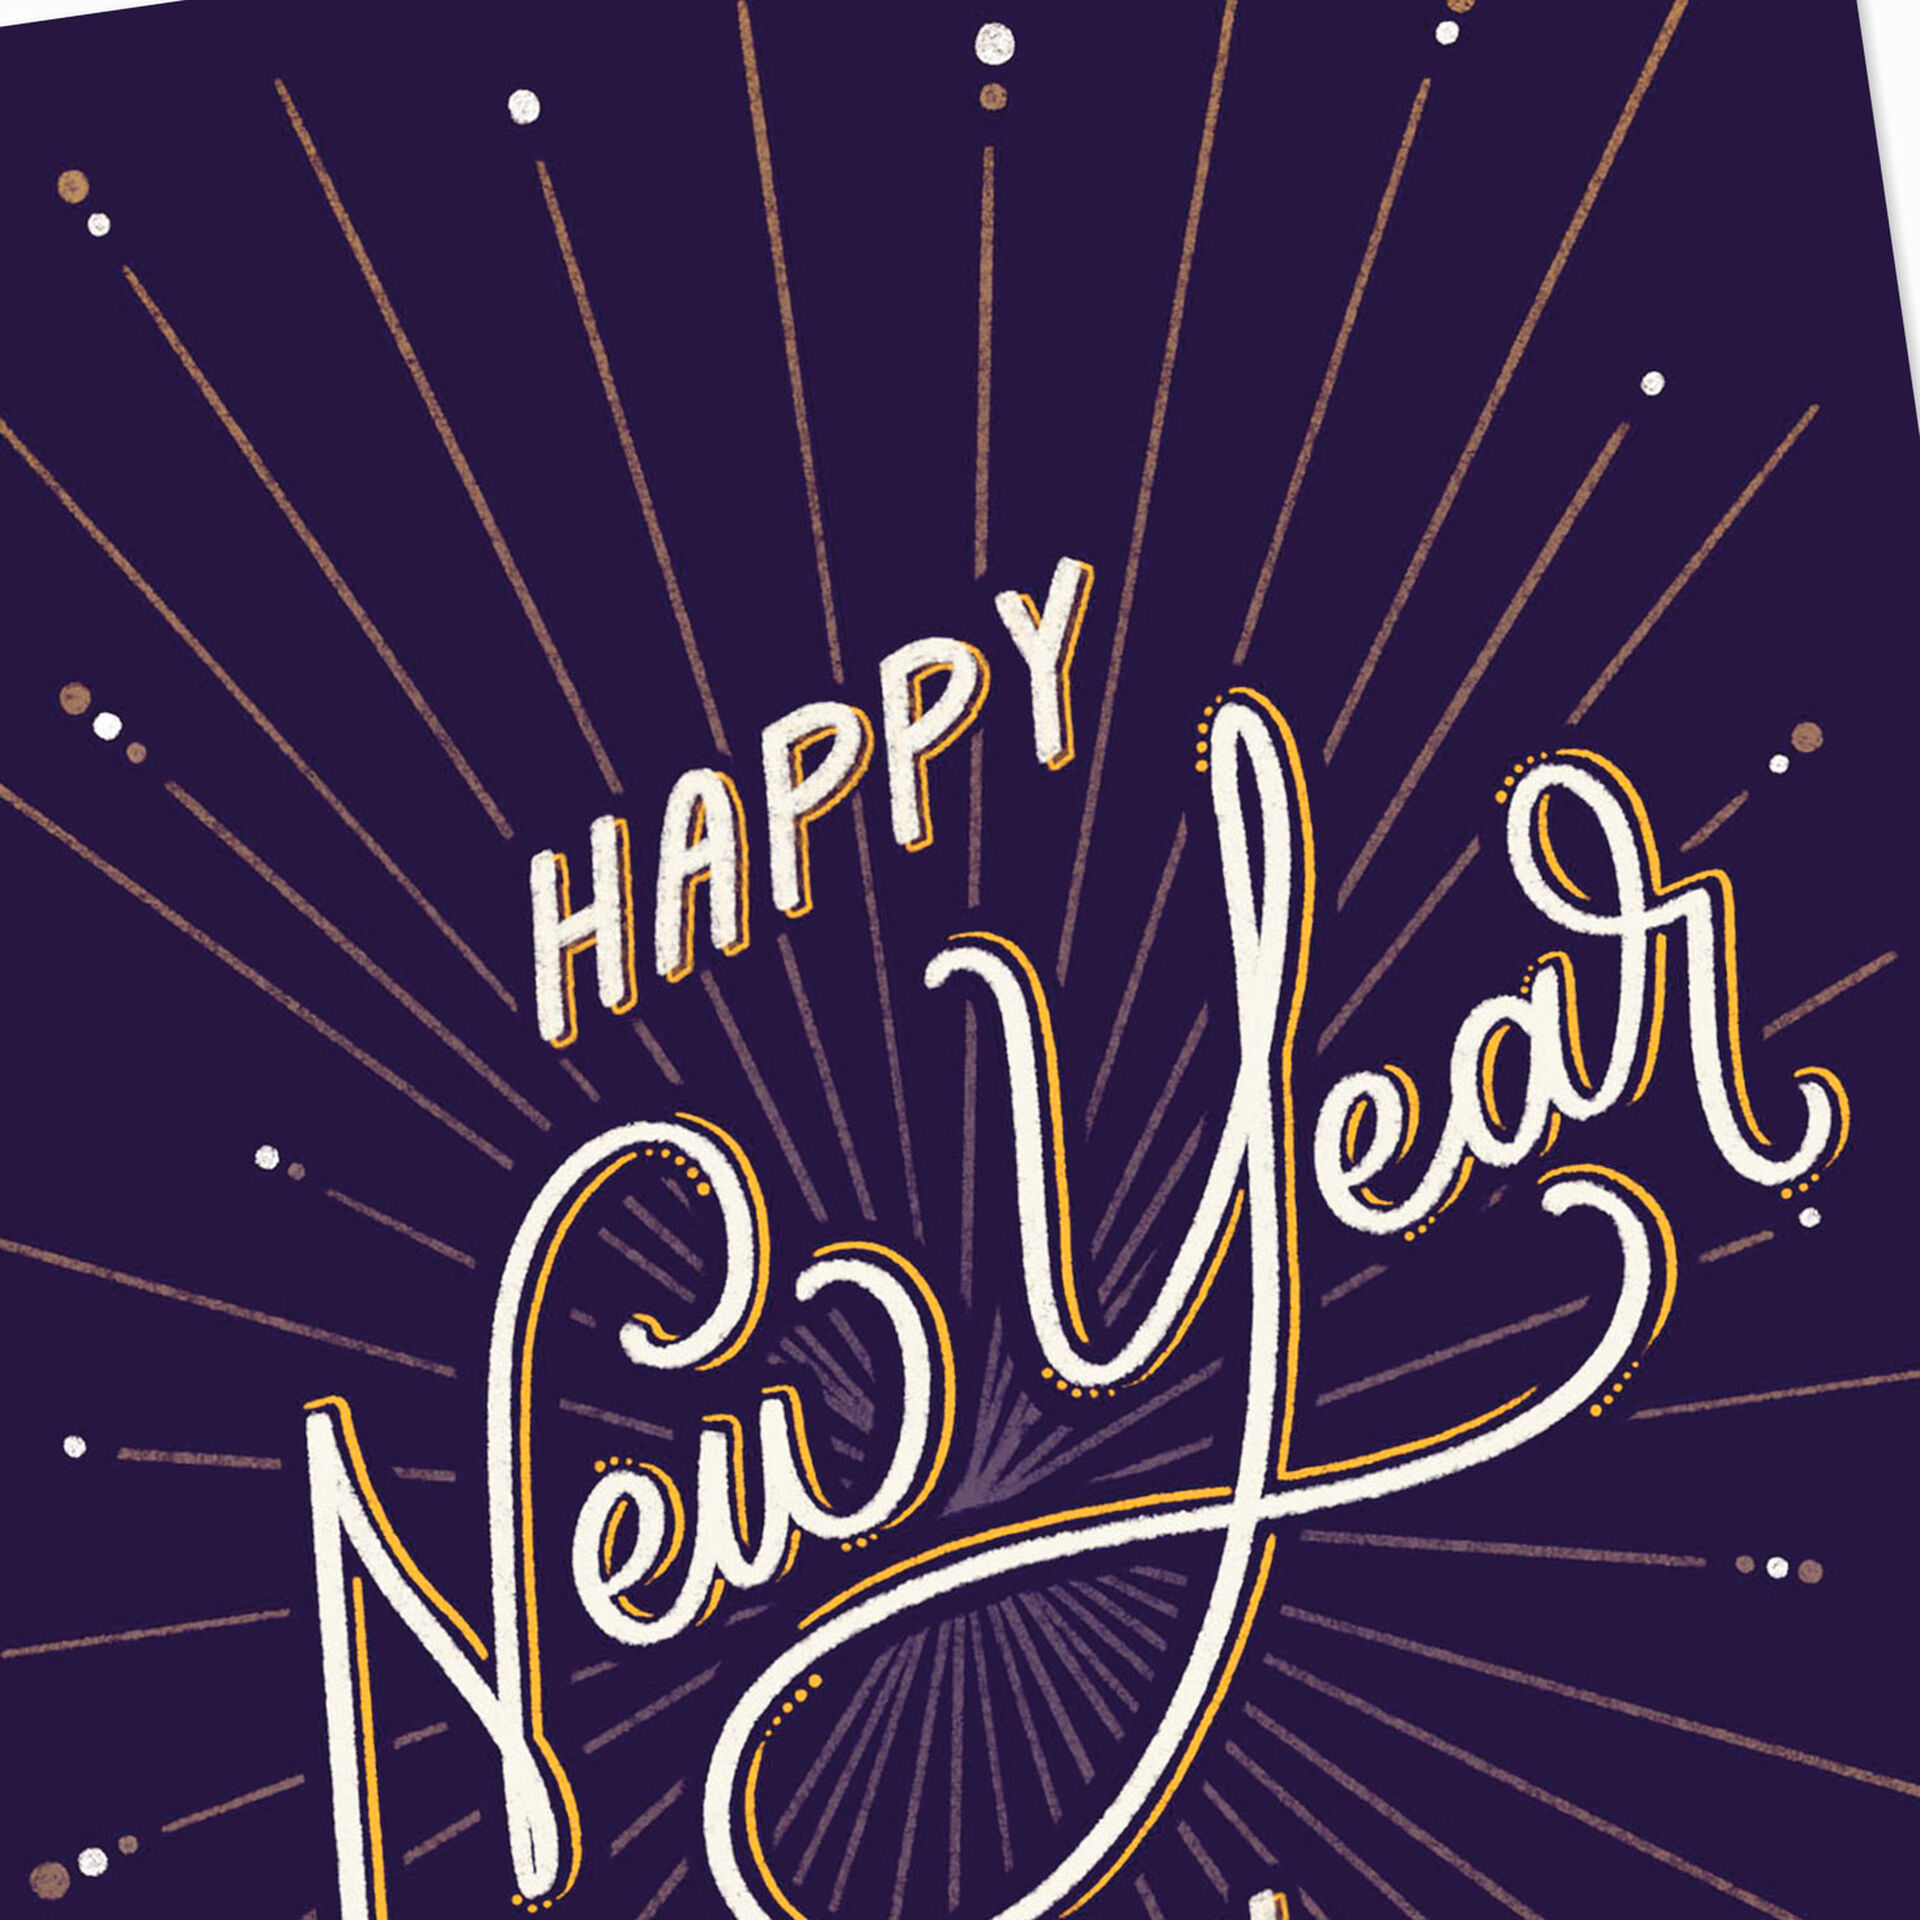 Starburst-on-Black-New-Year-Cards-Multipack_499NY3015_03